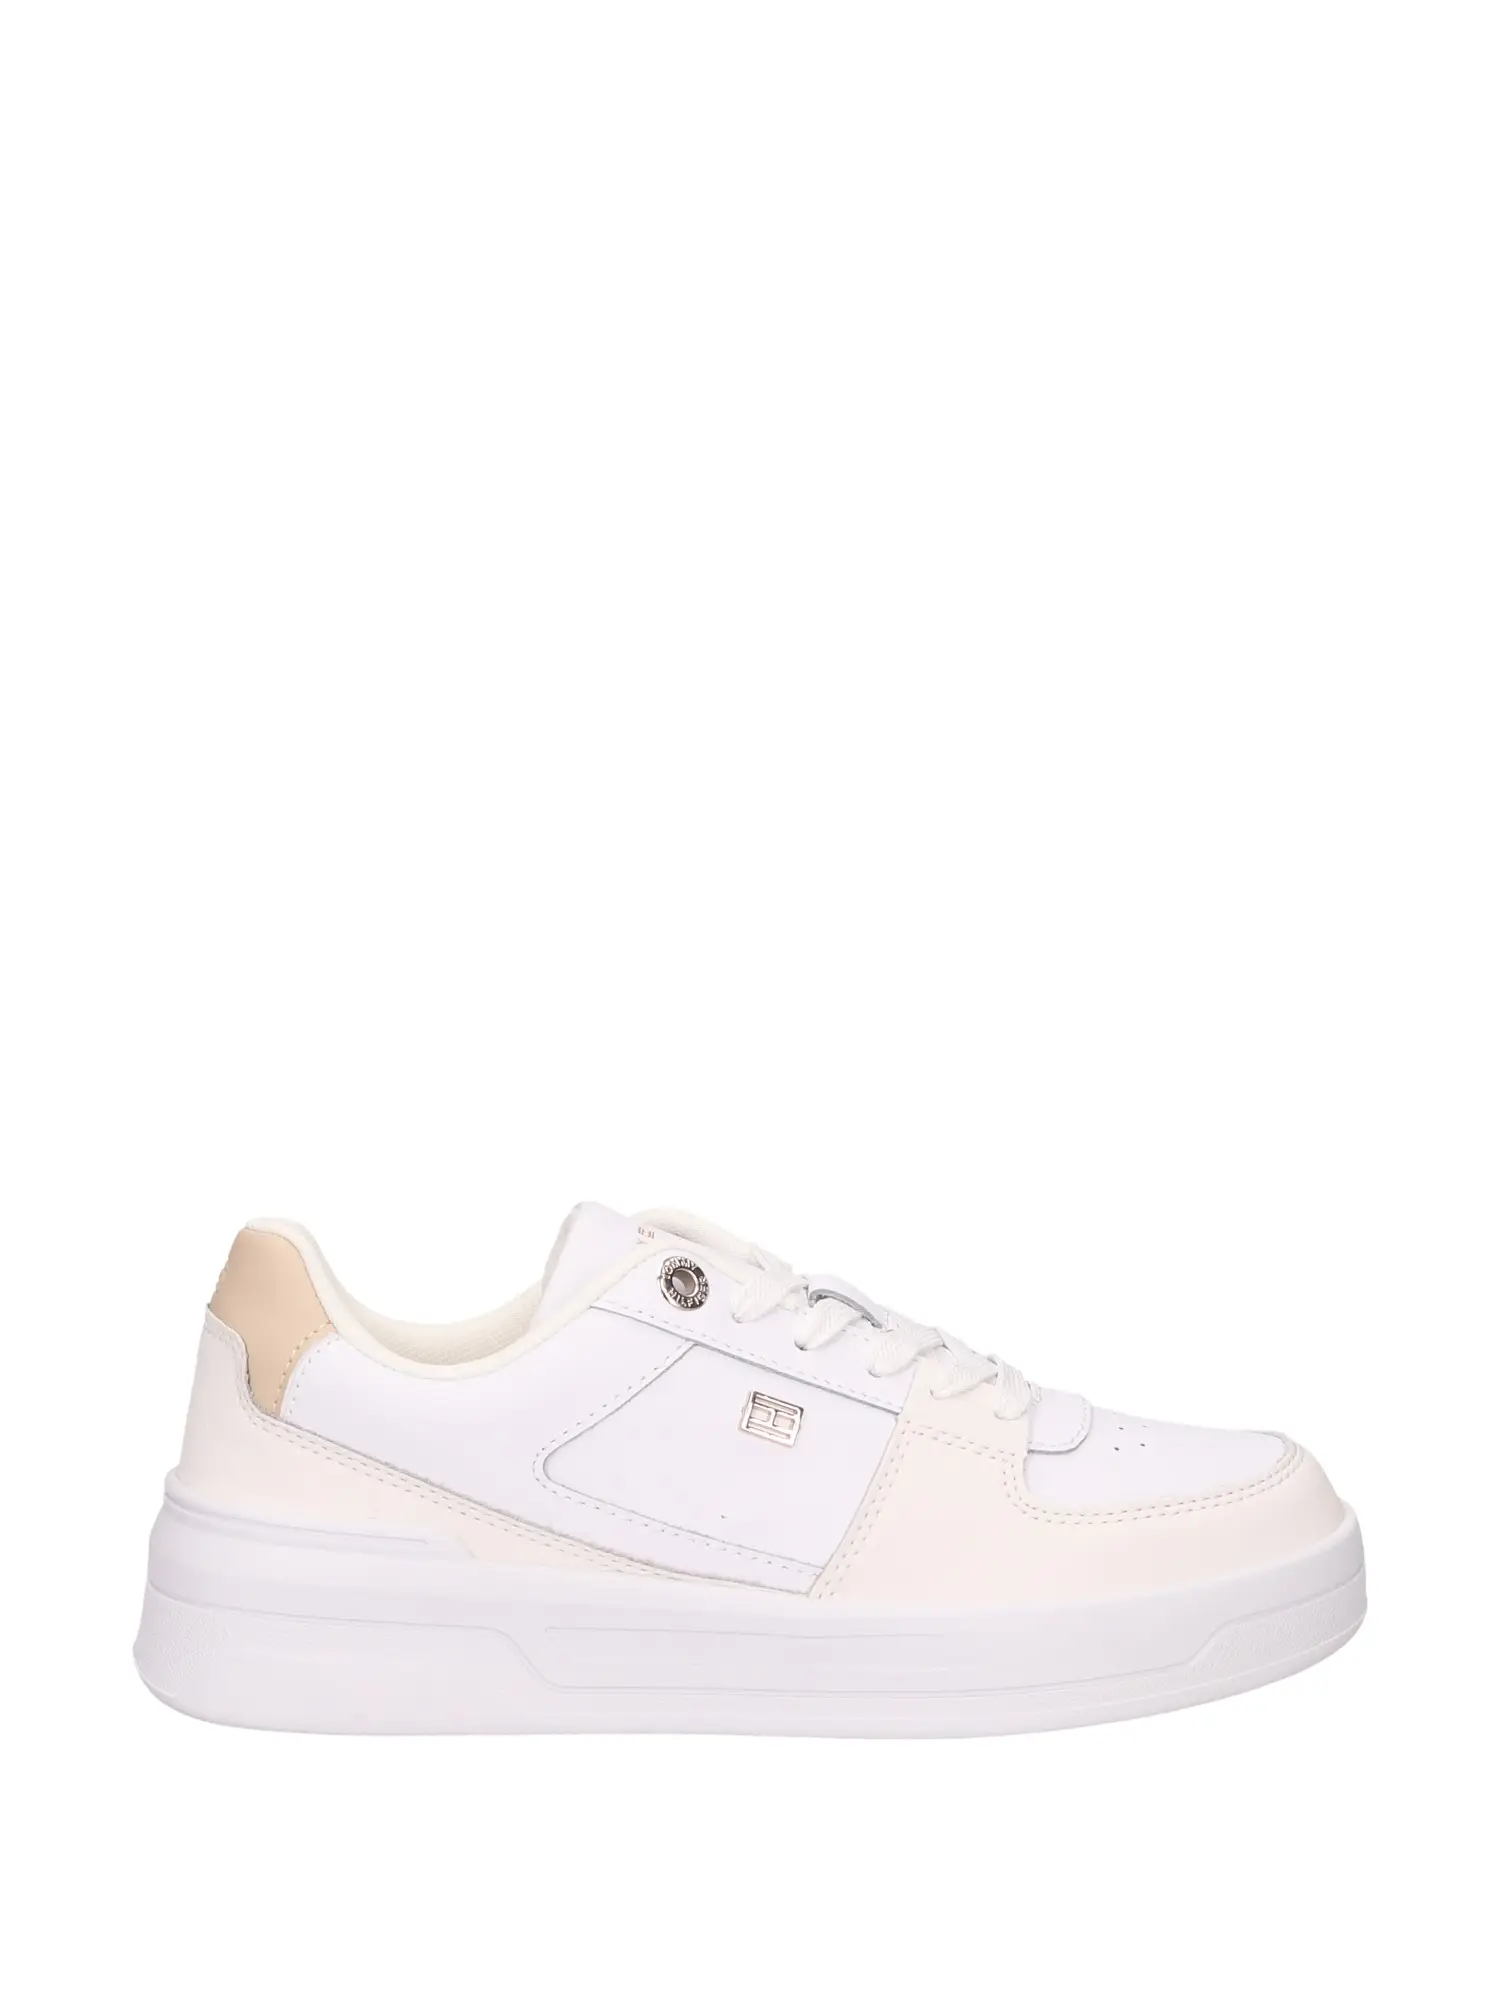 SNEAKERS DONNA - TOMMY HILFIGER - FW0FW07684 - BIANCO, 37